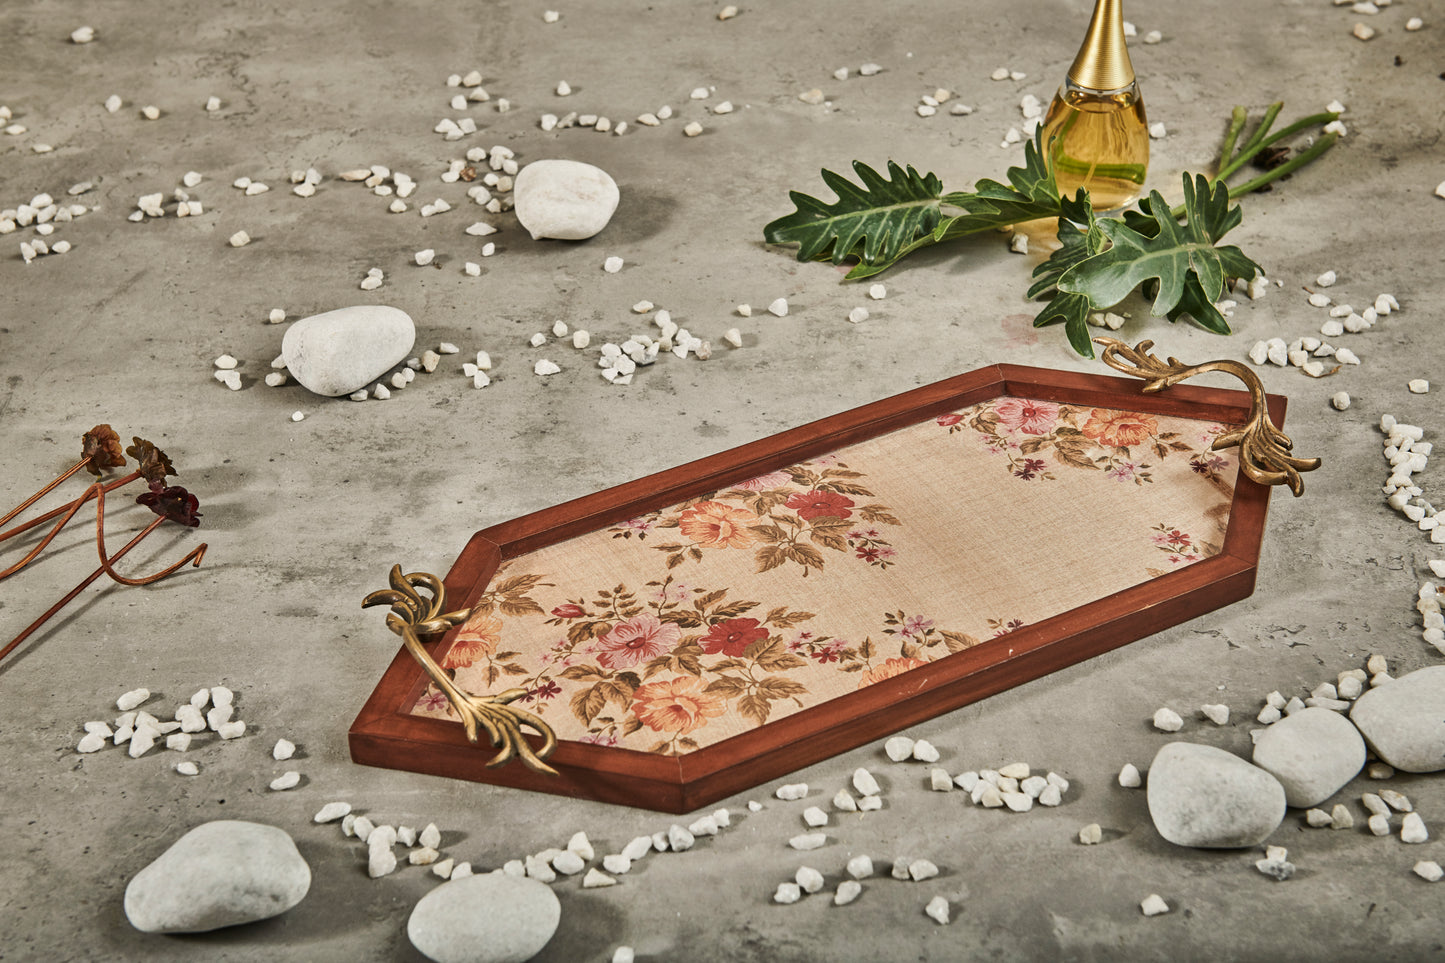 A Tiny Mistake Flowers Pattern Diamond Shaped Teak Serving Tray with Brass Handle, Tray for Serving Tea and Snacks, 49 x 20 x 2 cm